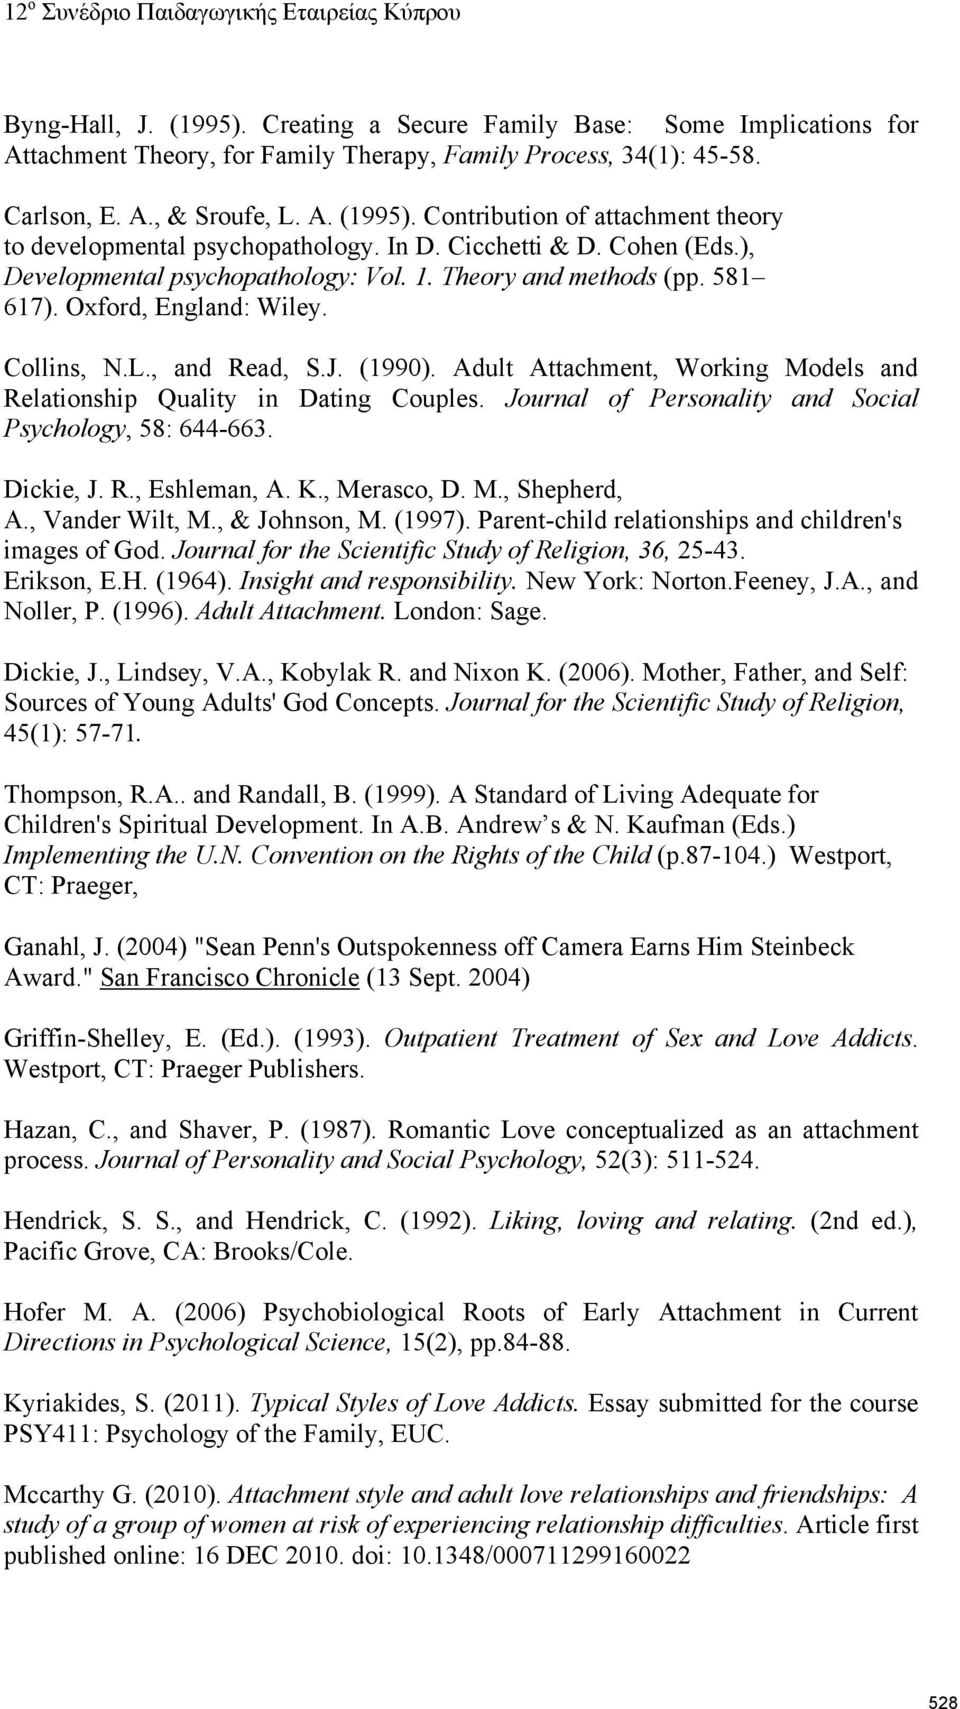 Adult Attachment, Working Models and Relationship Quality in Dating Couples. Journal of Personality and Social Psychology, 58: 644-663. Dickie, J. R., Eshleman, A. K., Merasco, D. M., Shepherd, A.